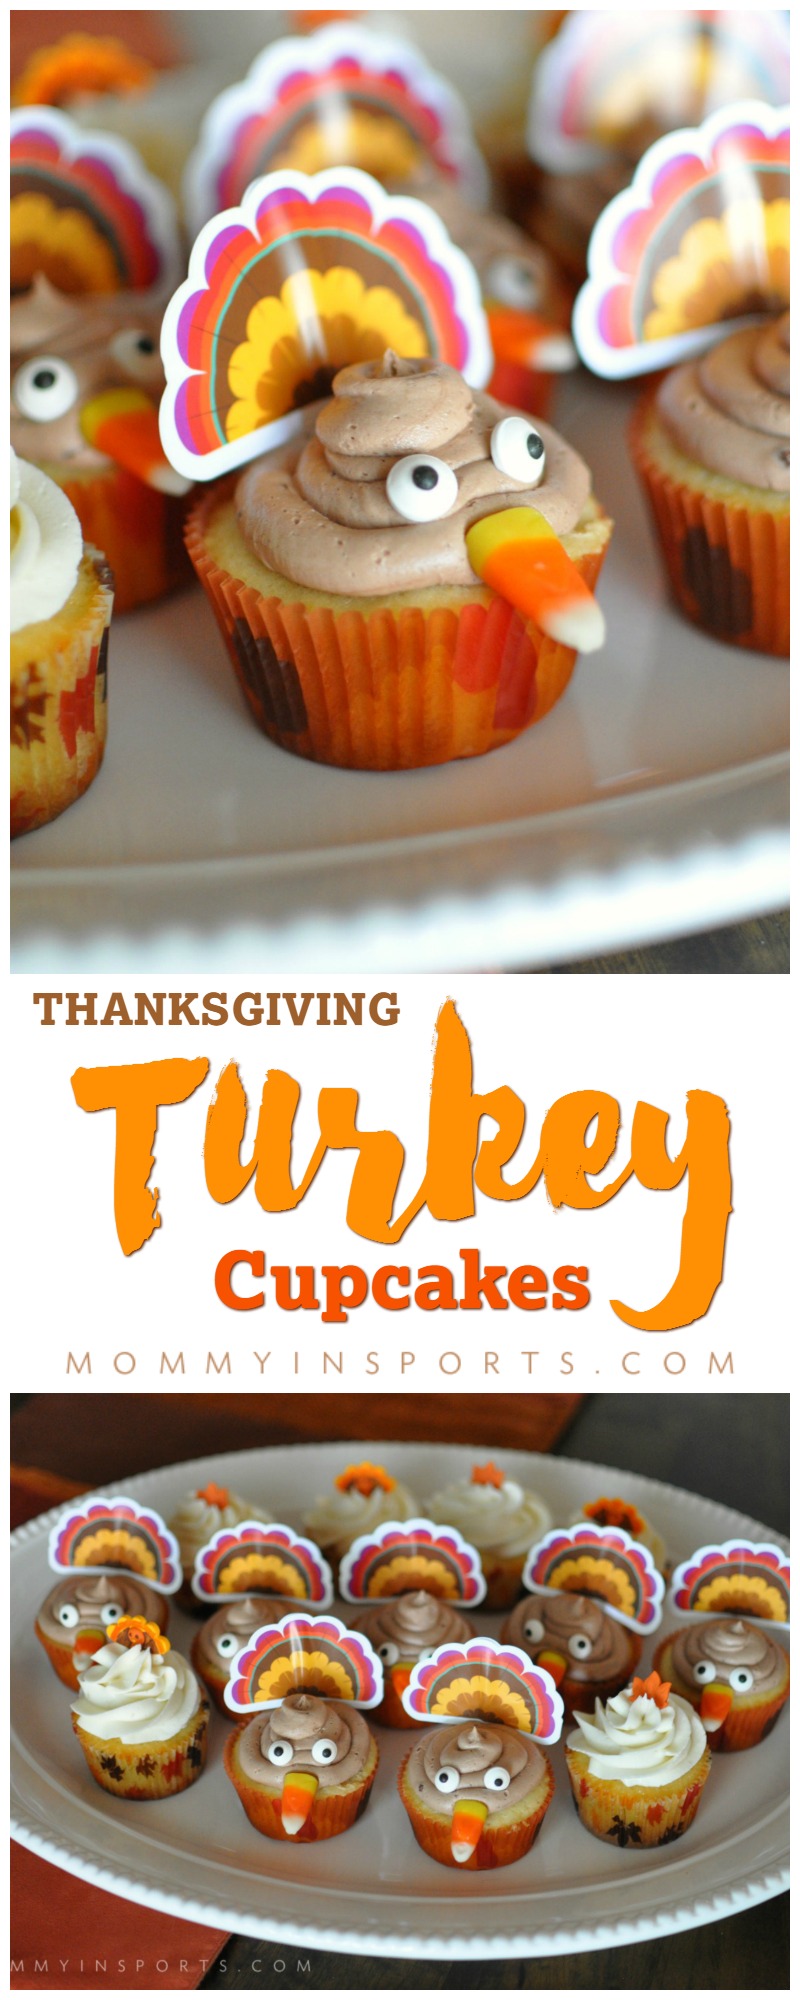 Need a dessert your friends and family will gobble up on Thanksgiving? Try these too cute Thanksgiving Turkey Cupcakes!